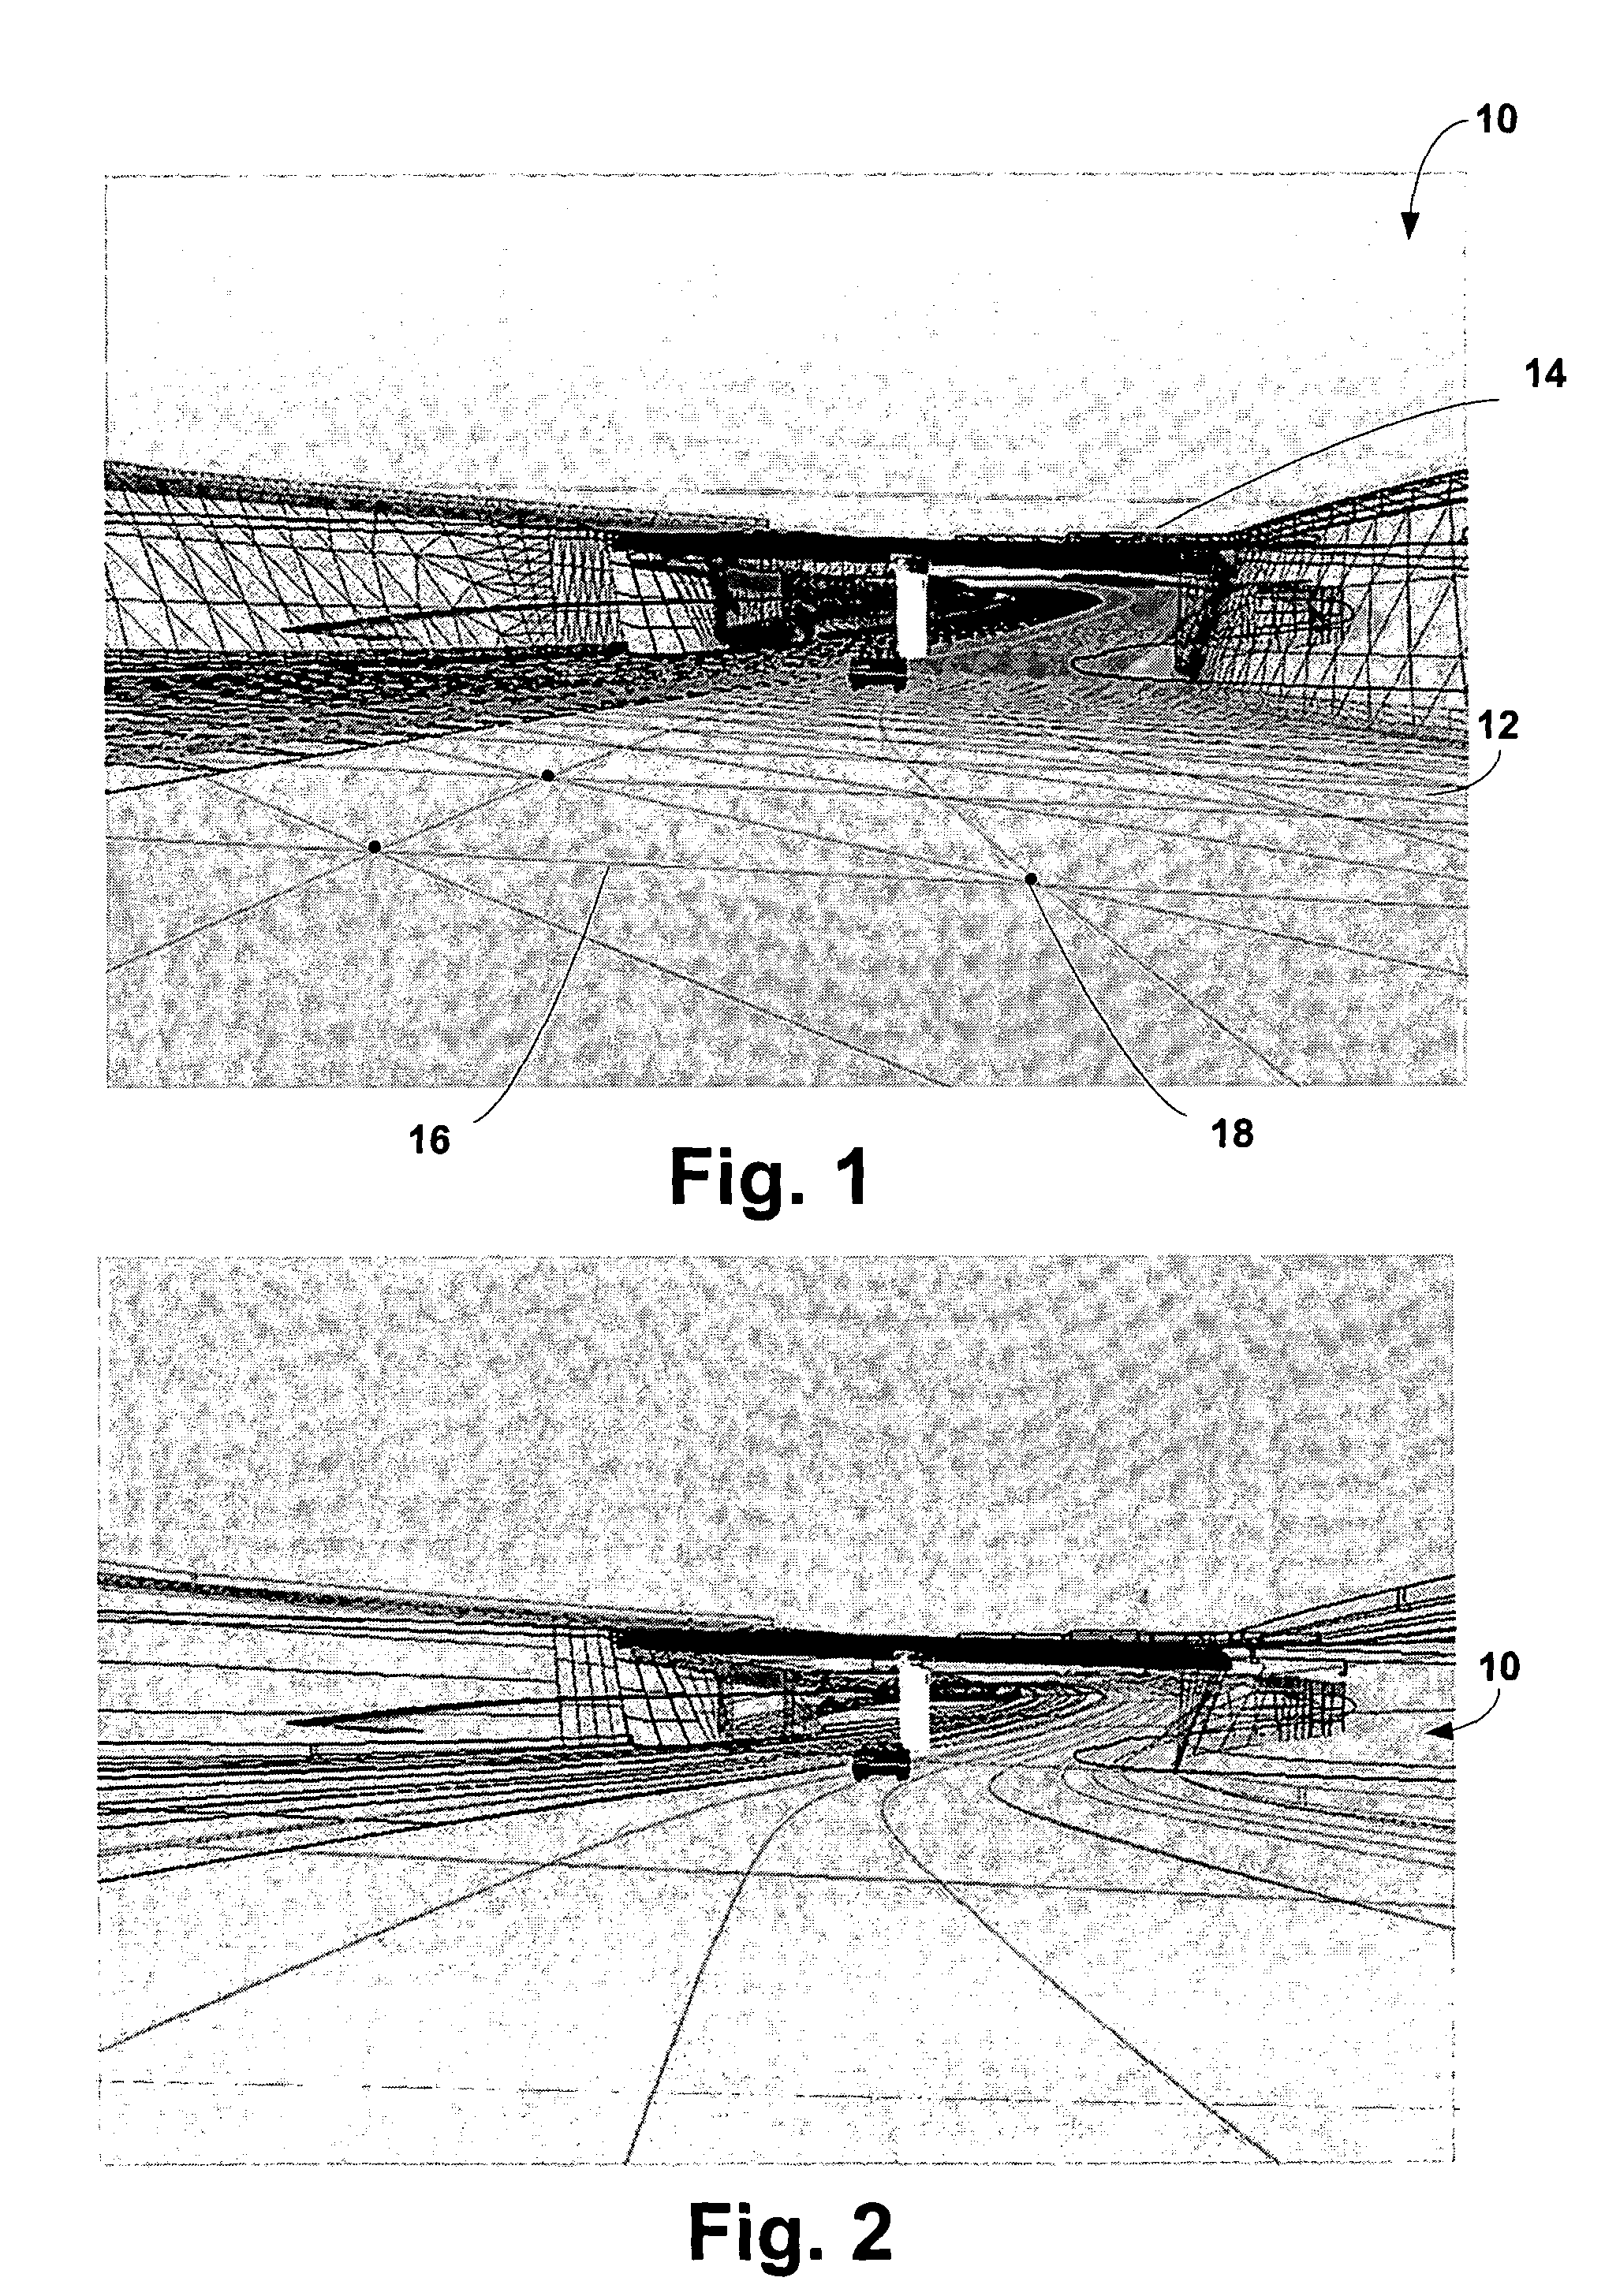 Method and system for converting engineering data into 3D modeling data